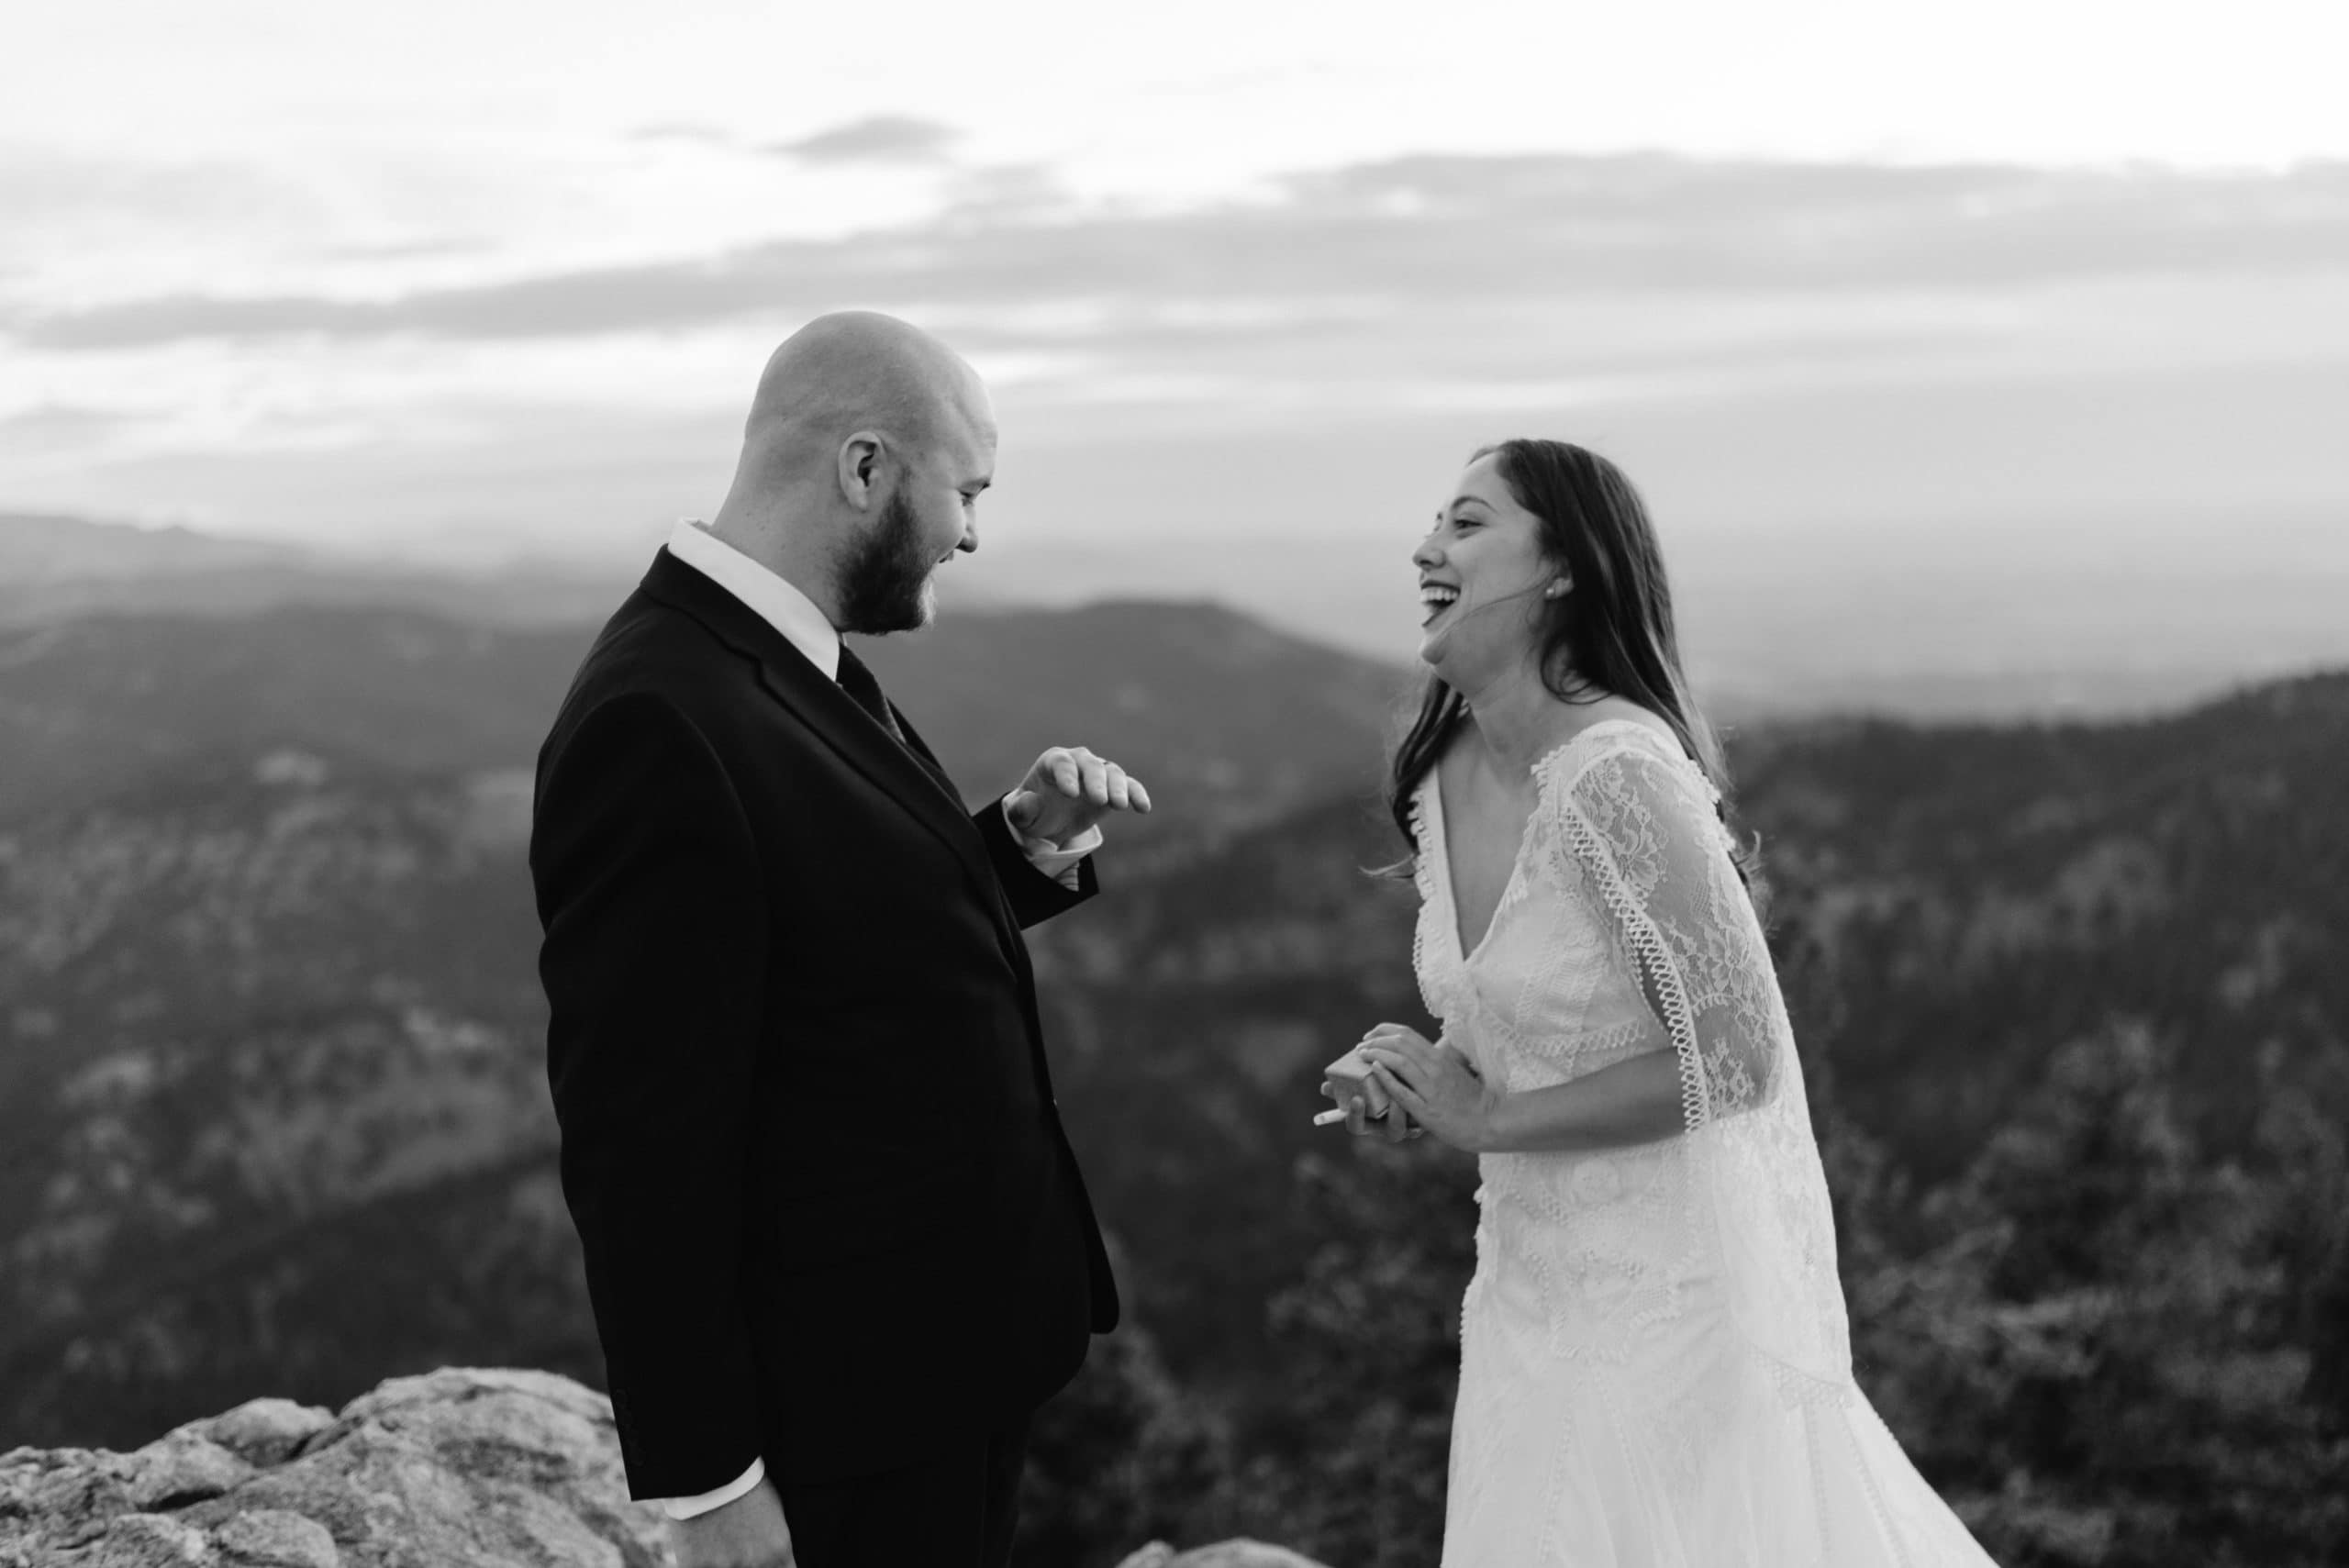 Reading vows at lost gulch overlook